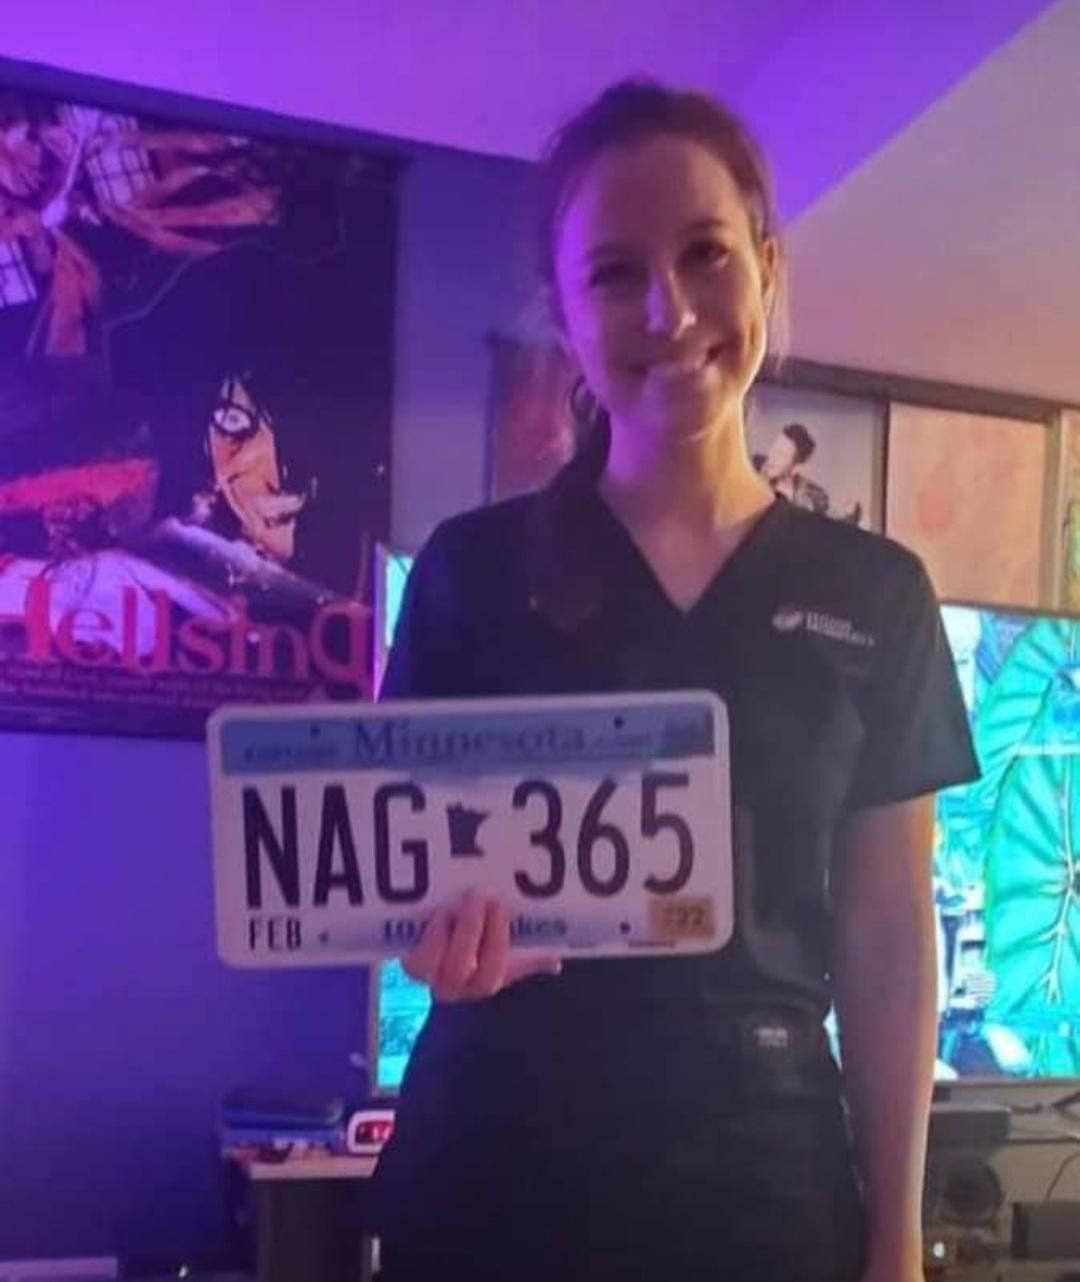 The perfect license plate doesn't exis-